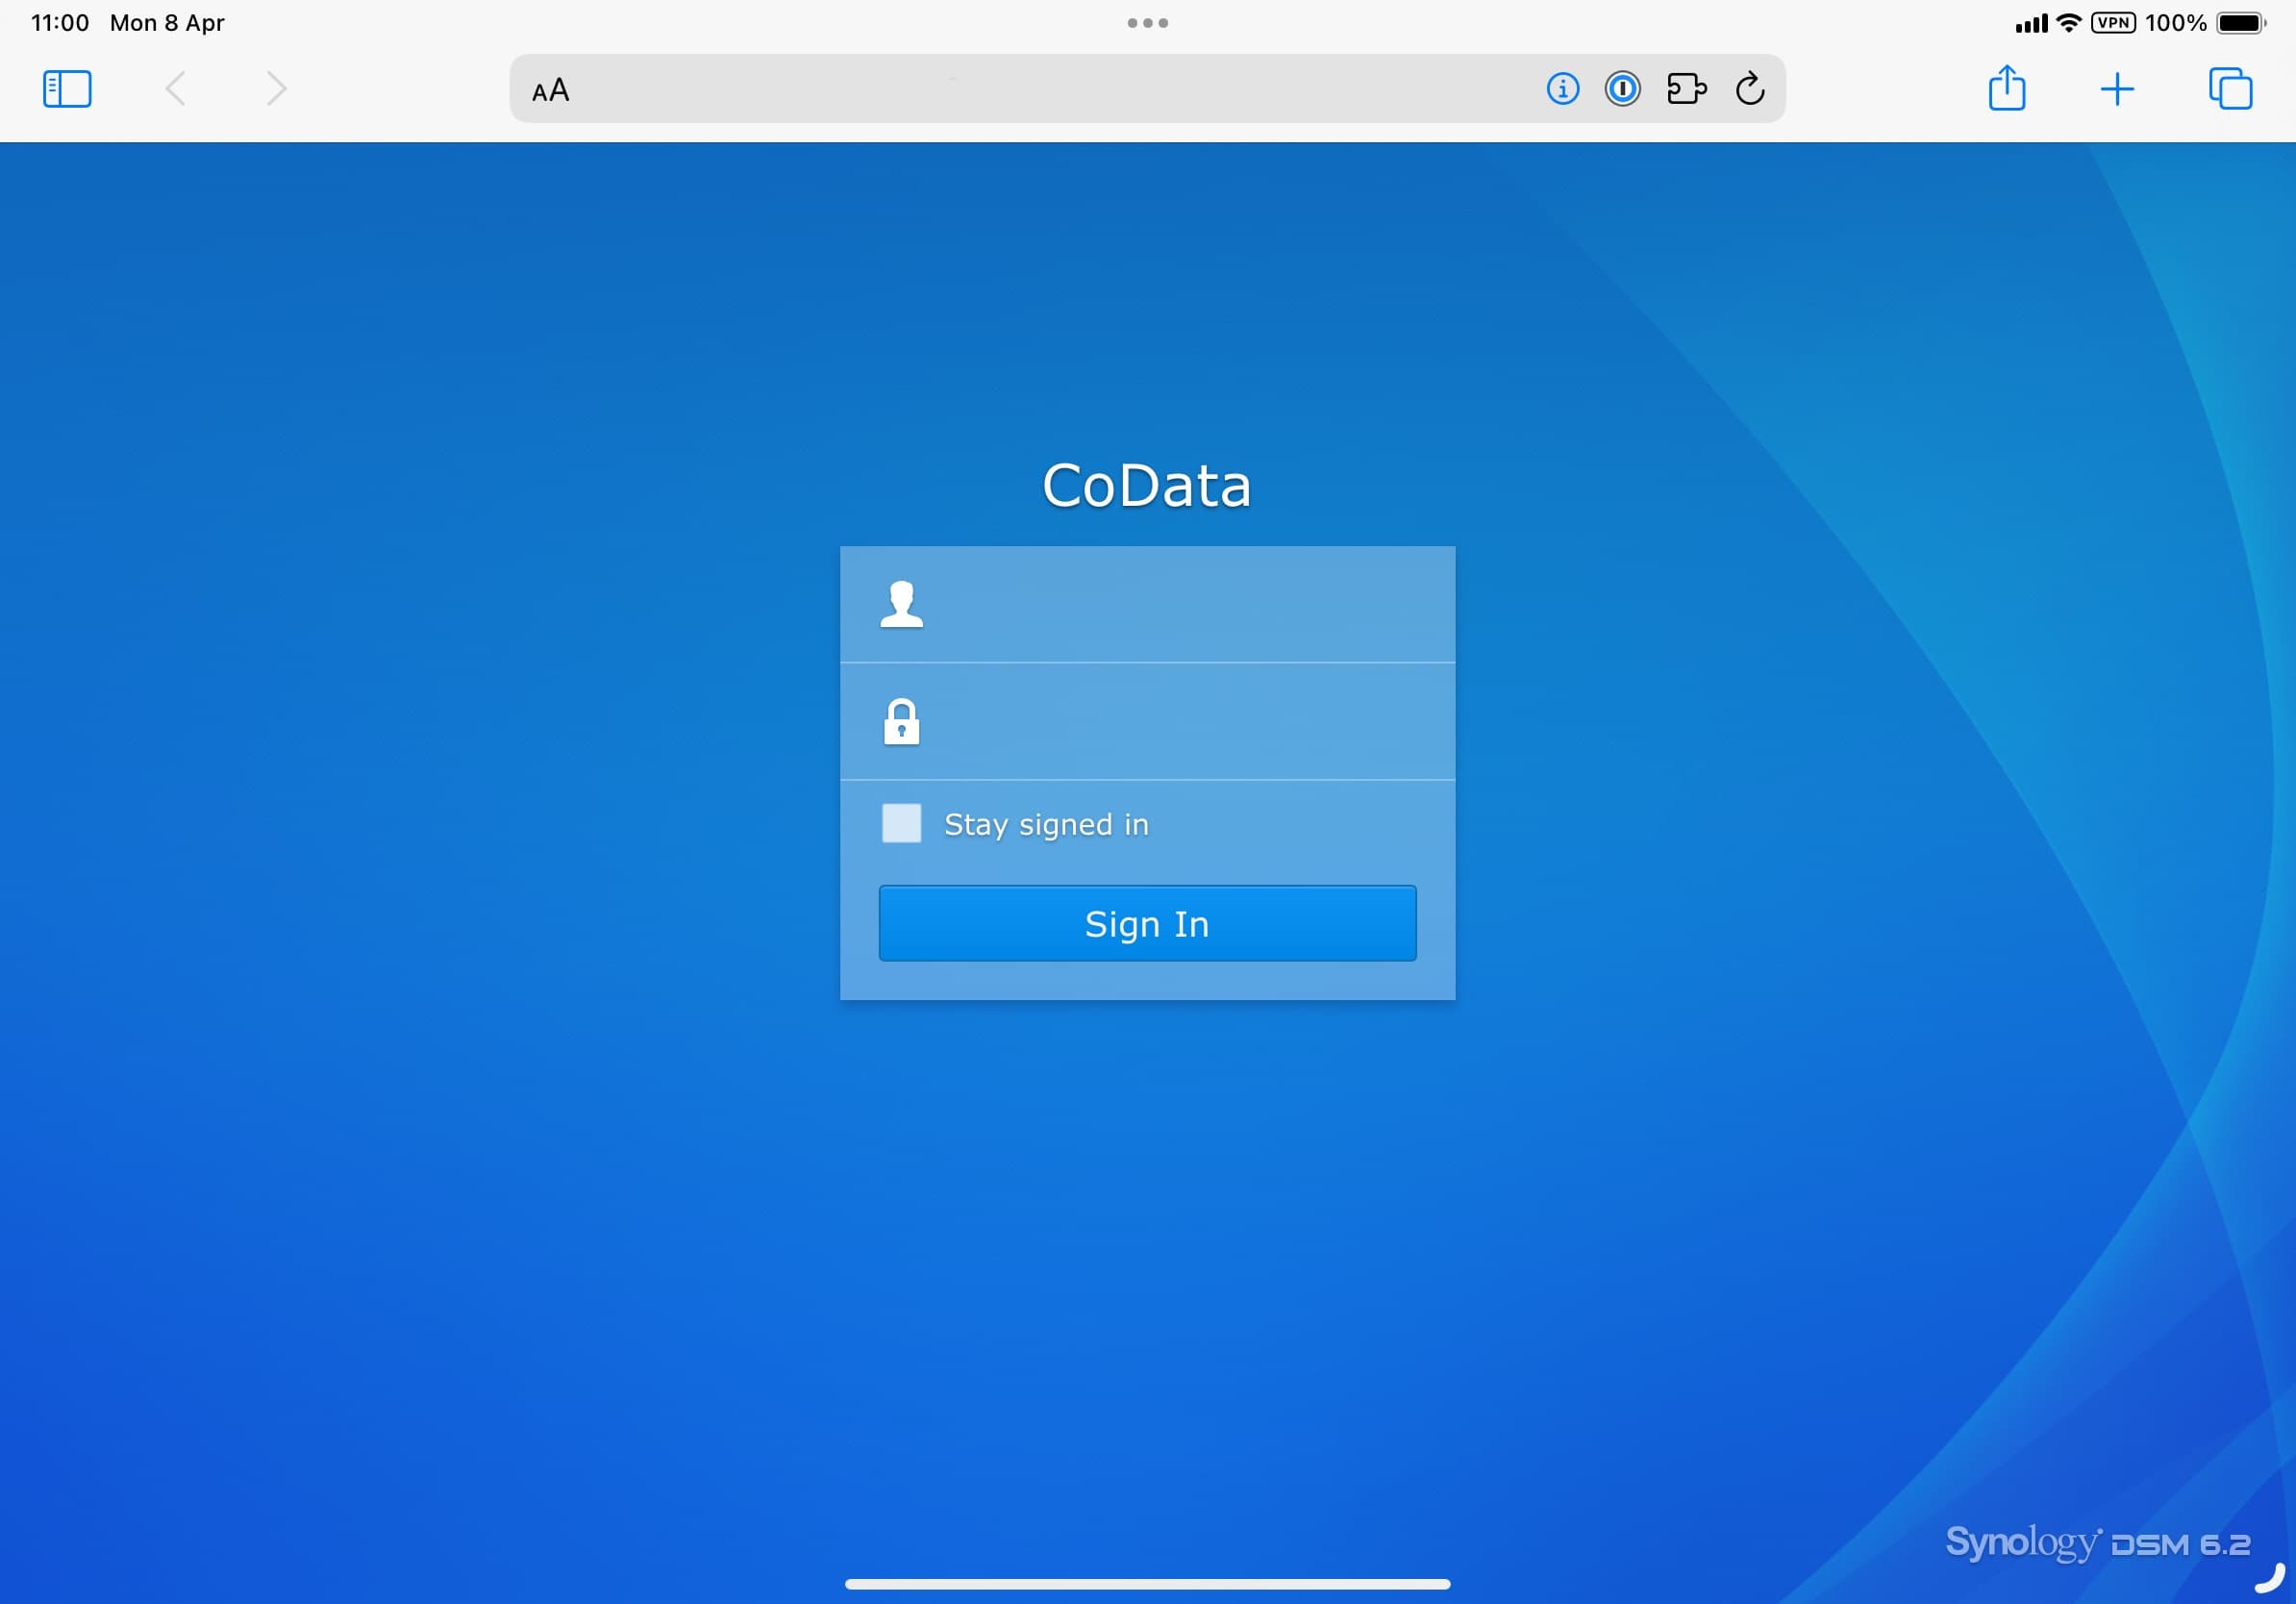 The login screen of a Synology NAS